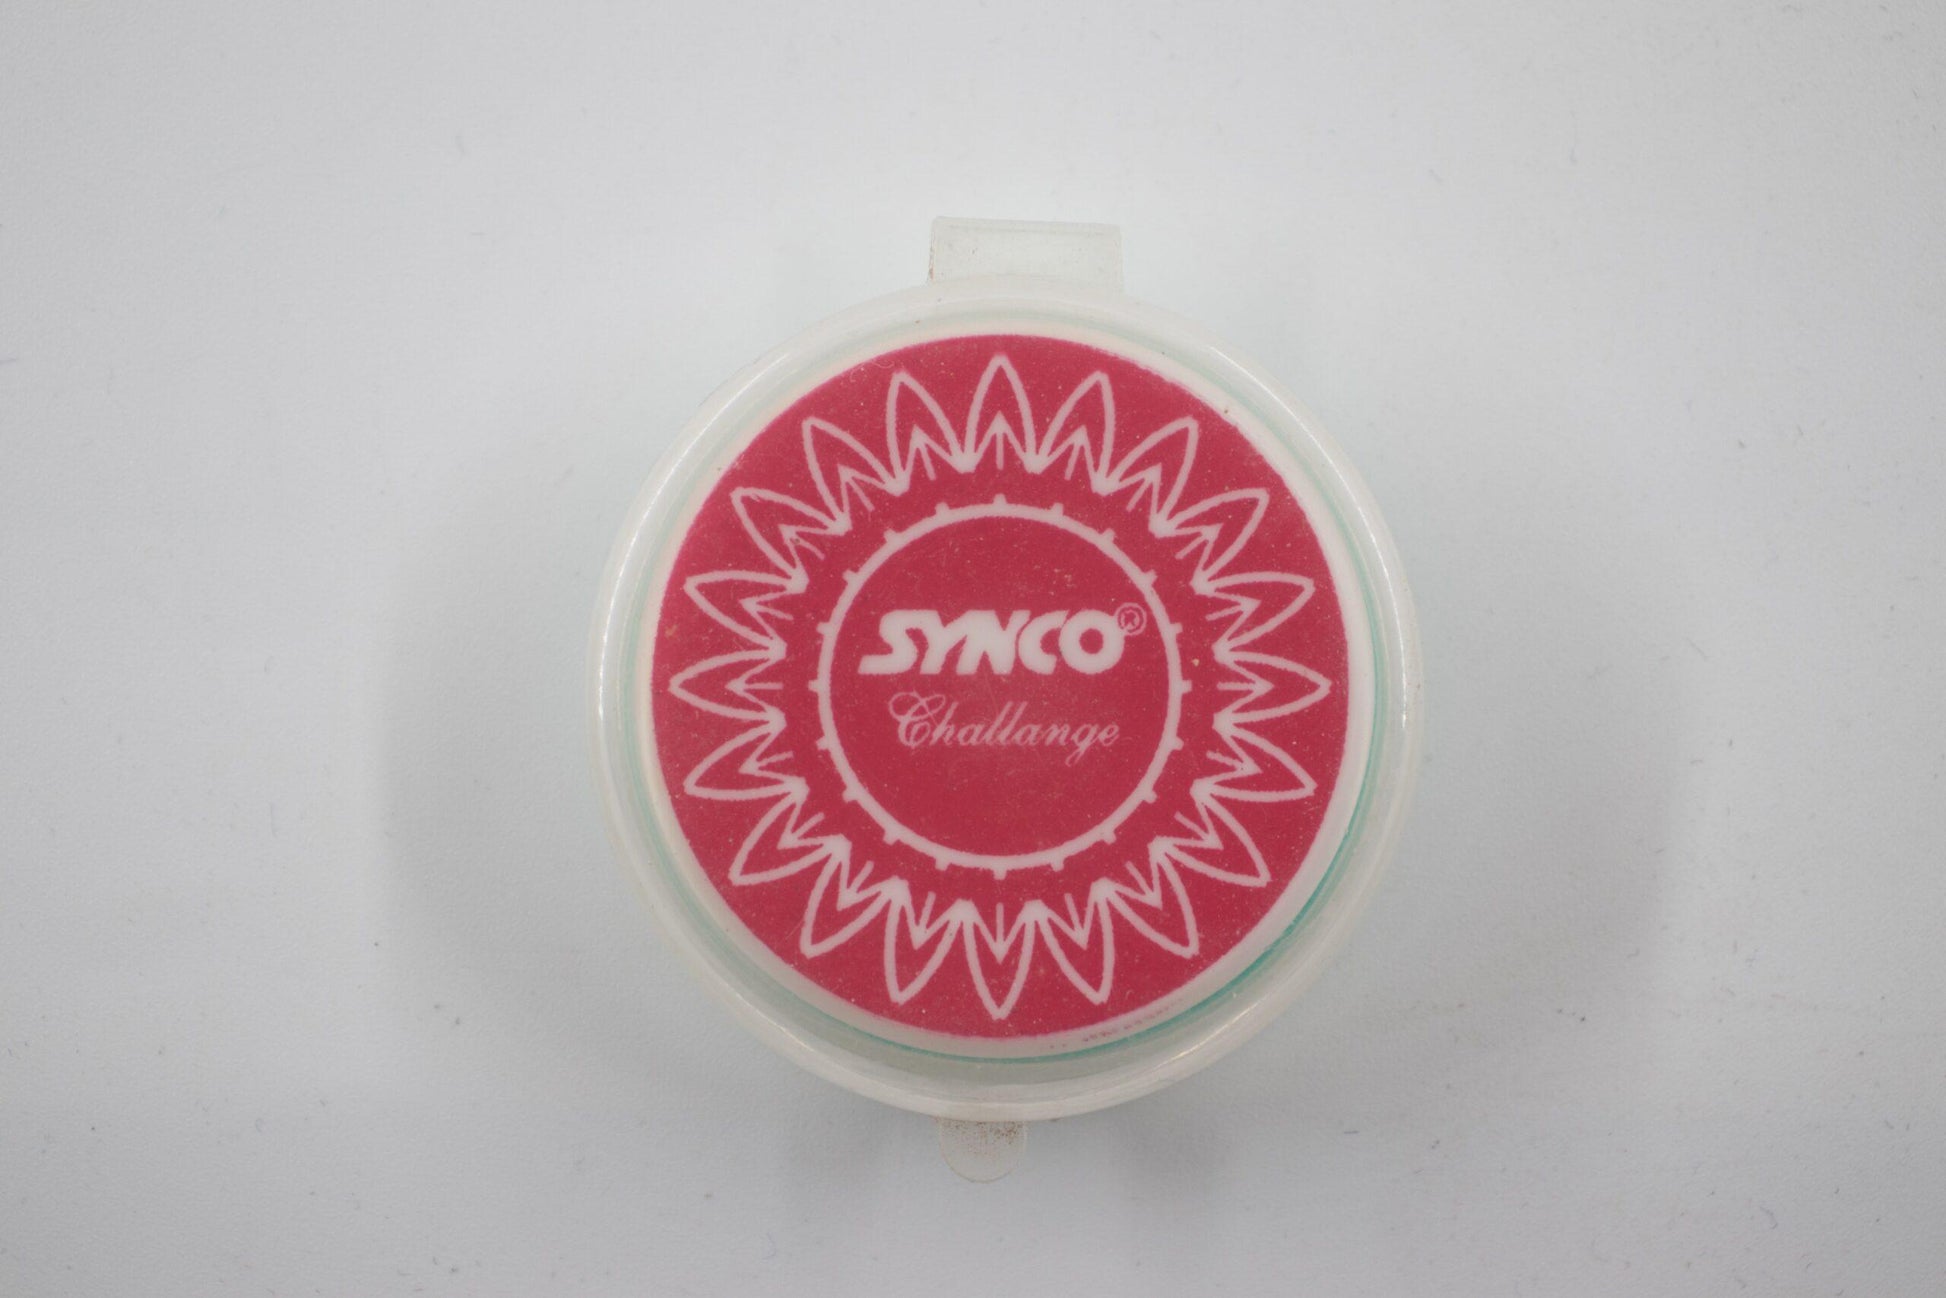 Synco Challenge carrom striker professional, Assorted color - 4